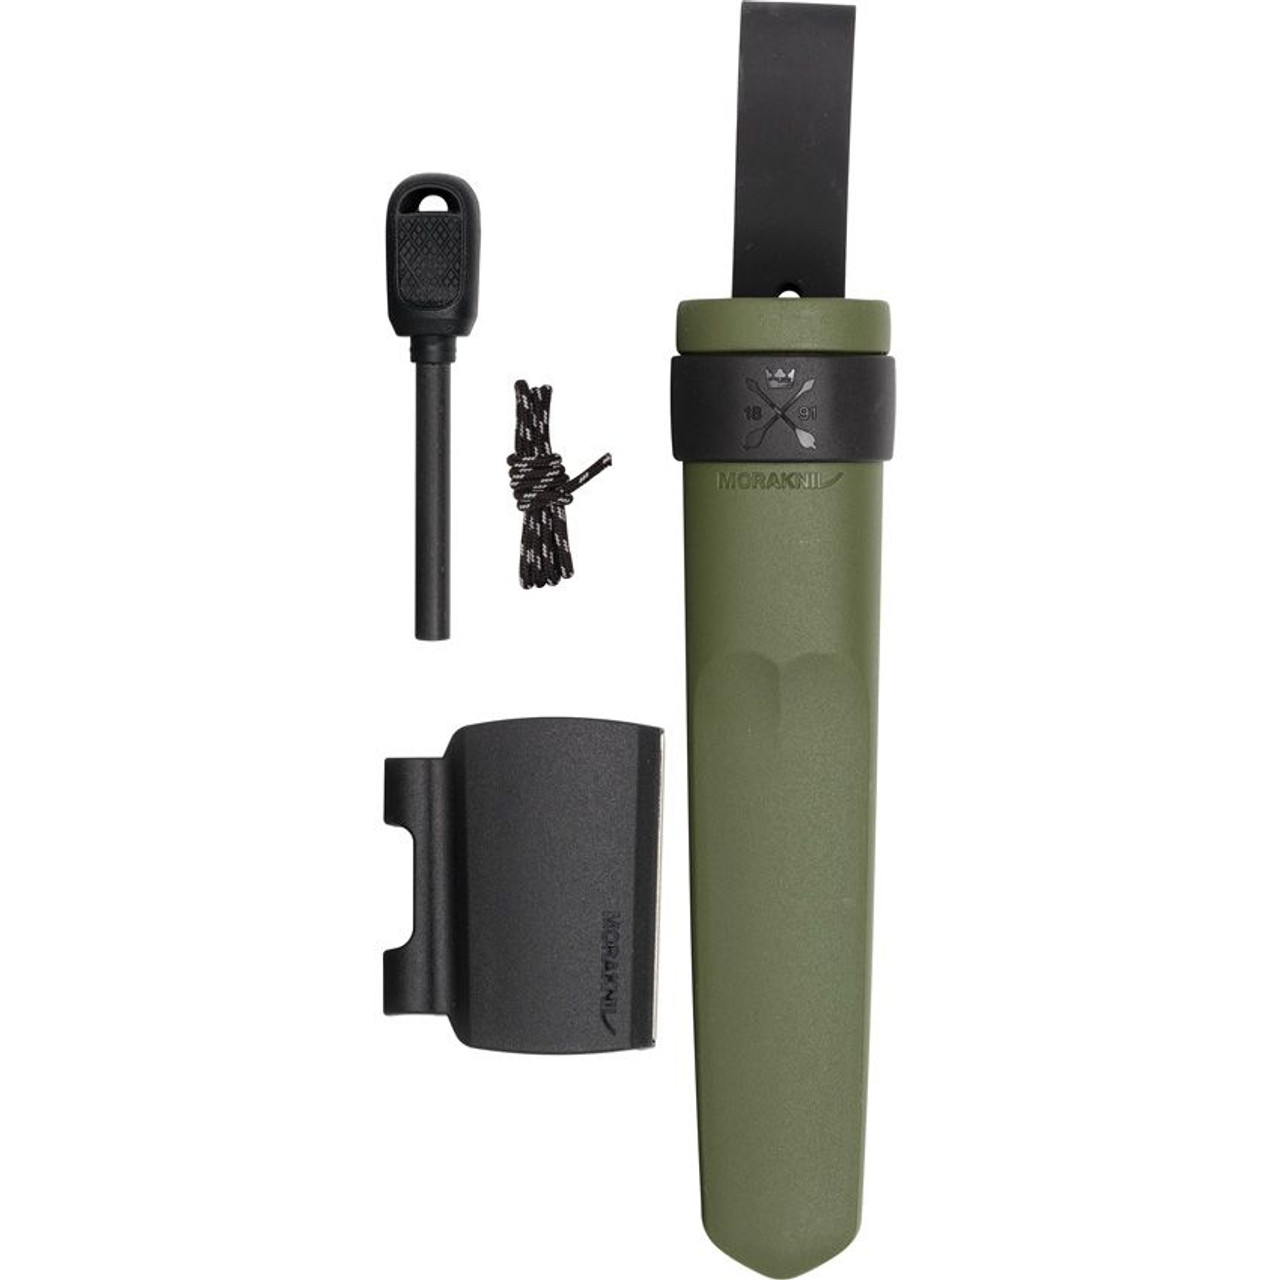 Morakniv Kansbol w Survival Kit (FT02566) 4.125" 12C27 Stainless Steel Satin Drop Point Plain Blade, Green Polymer with Rubber Insert Handle, Green Polymer Sheath, Detachable Survival Kit with Fire Starter, Diamond Sharpener, and Reflective Paracord, Detachable Leather Belt Loop